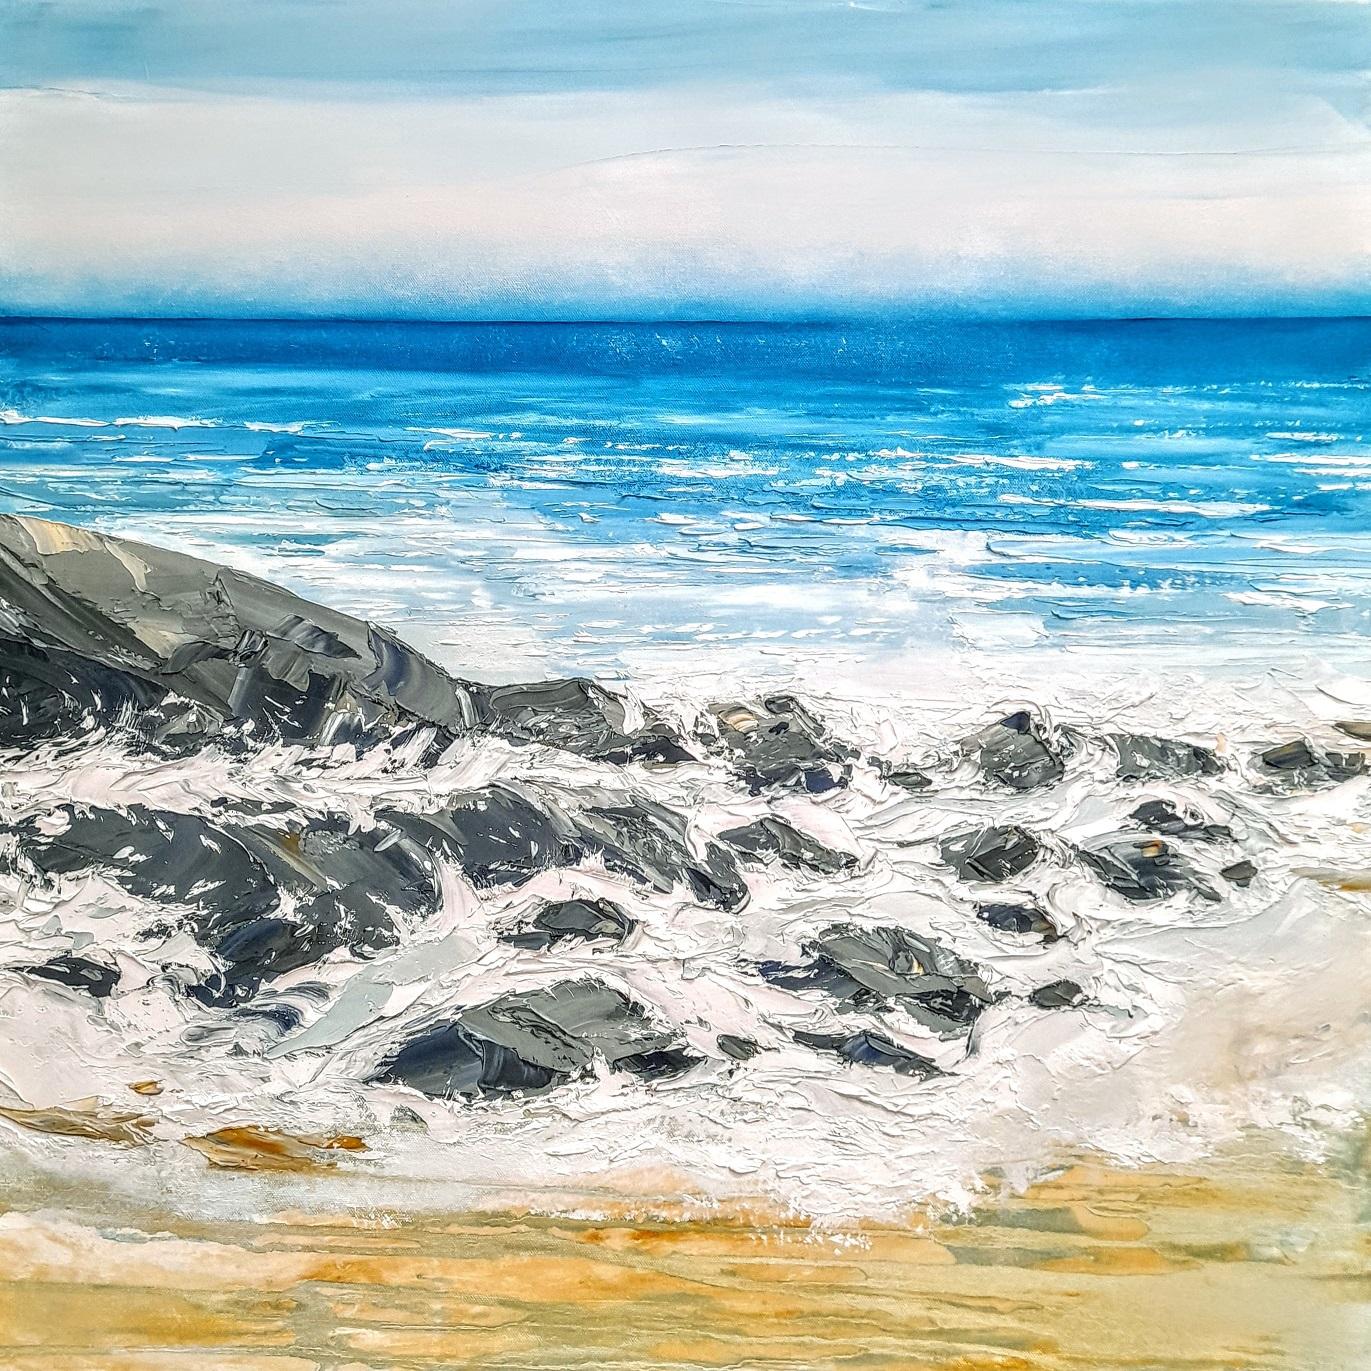 Georgie Dowling Landscape Painting - Summer on the Cornwall Coast, Abstract Seascape Painting, Textured Coastal Art